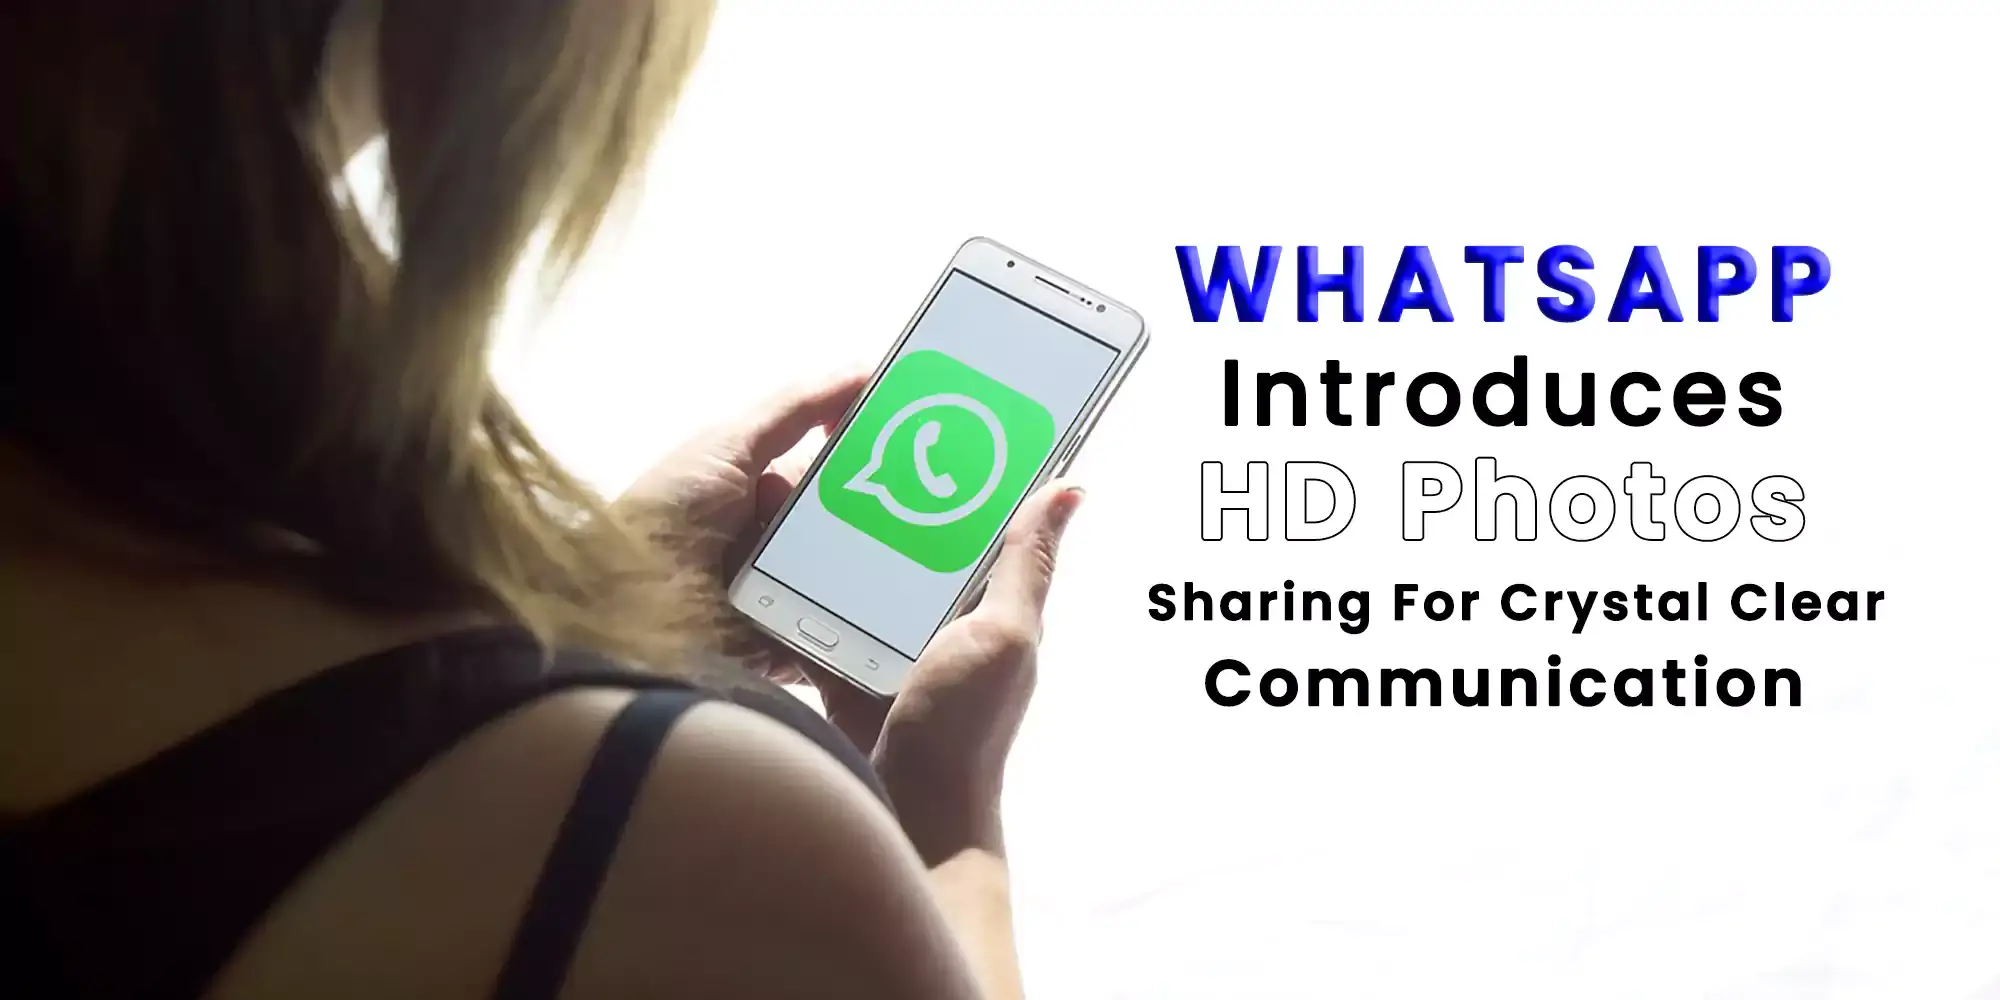 WhatsApp Introduces HD Photos For Crystal Clear Communication